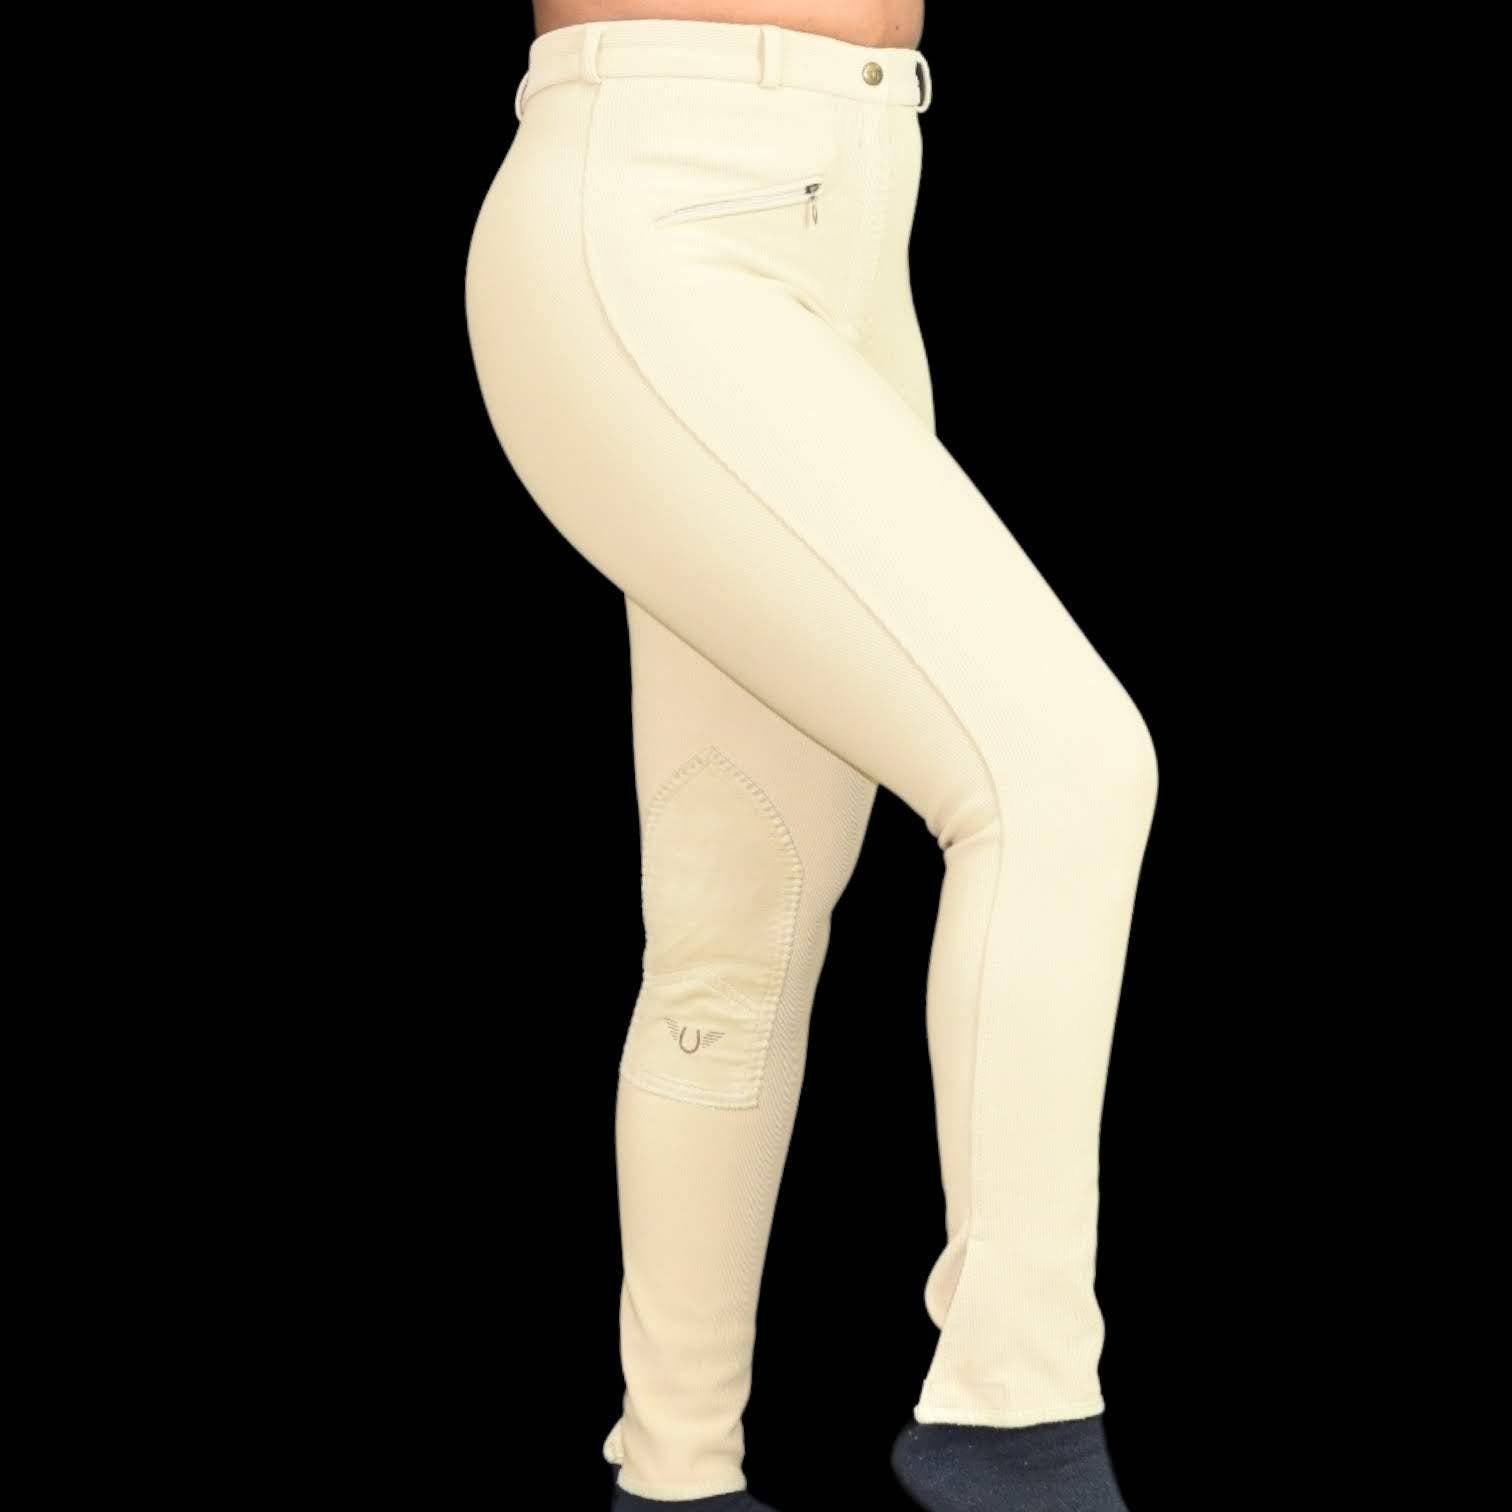 Tuffrider Riding Pants Tan Ribbed Knee Patch Breeches Sock Bottom Size 26 Womens Equestrian